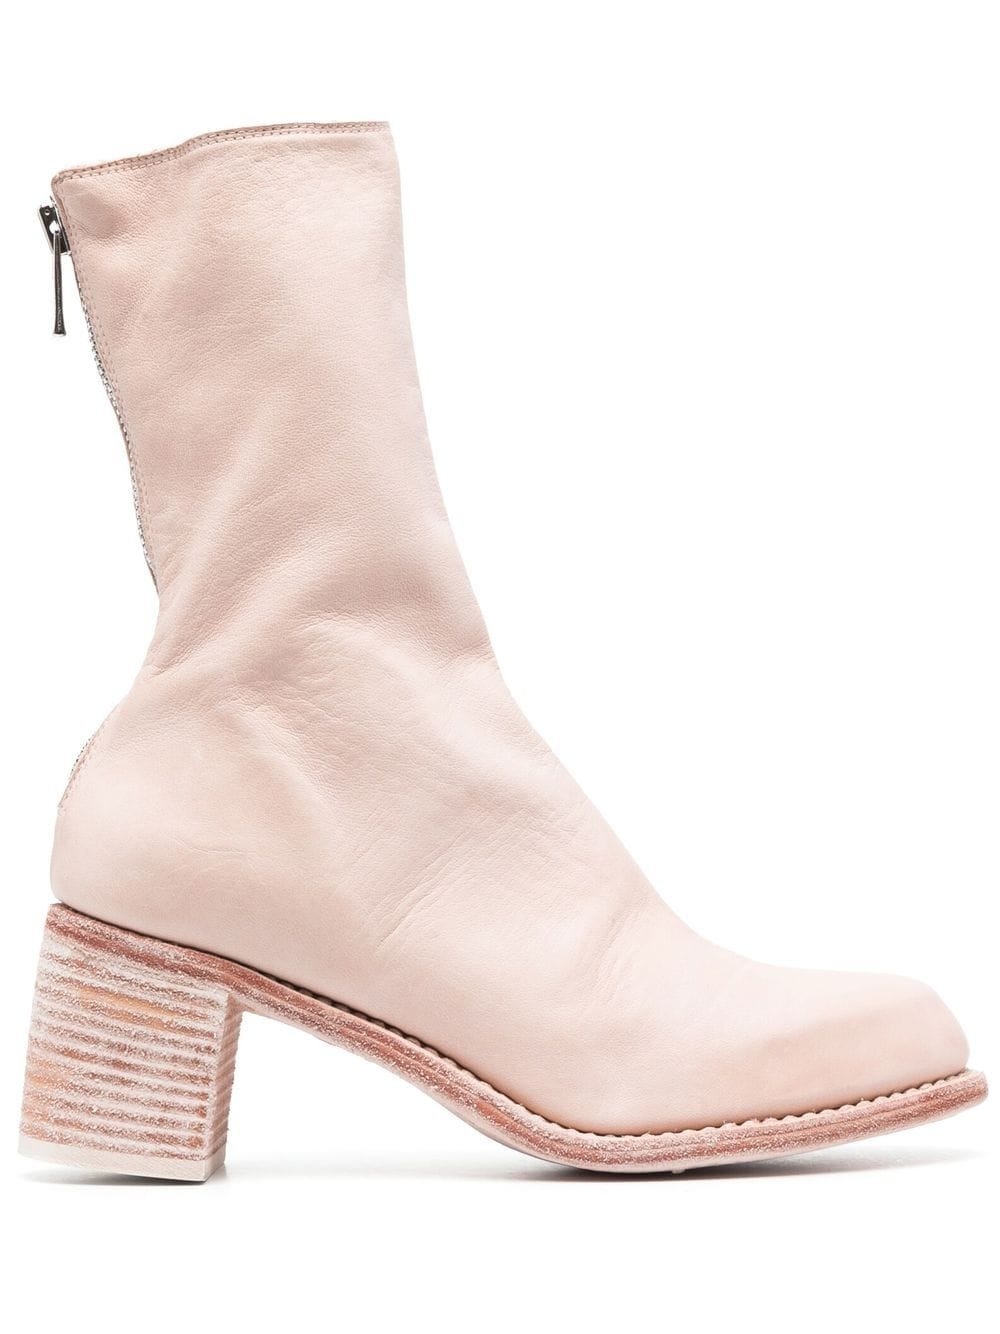 stack-heel leather ankle boots - 1